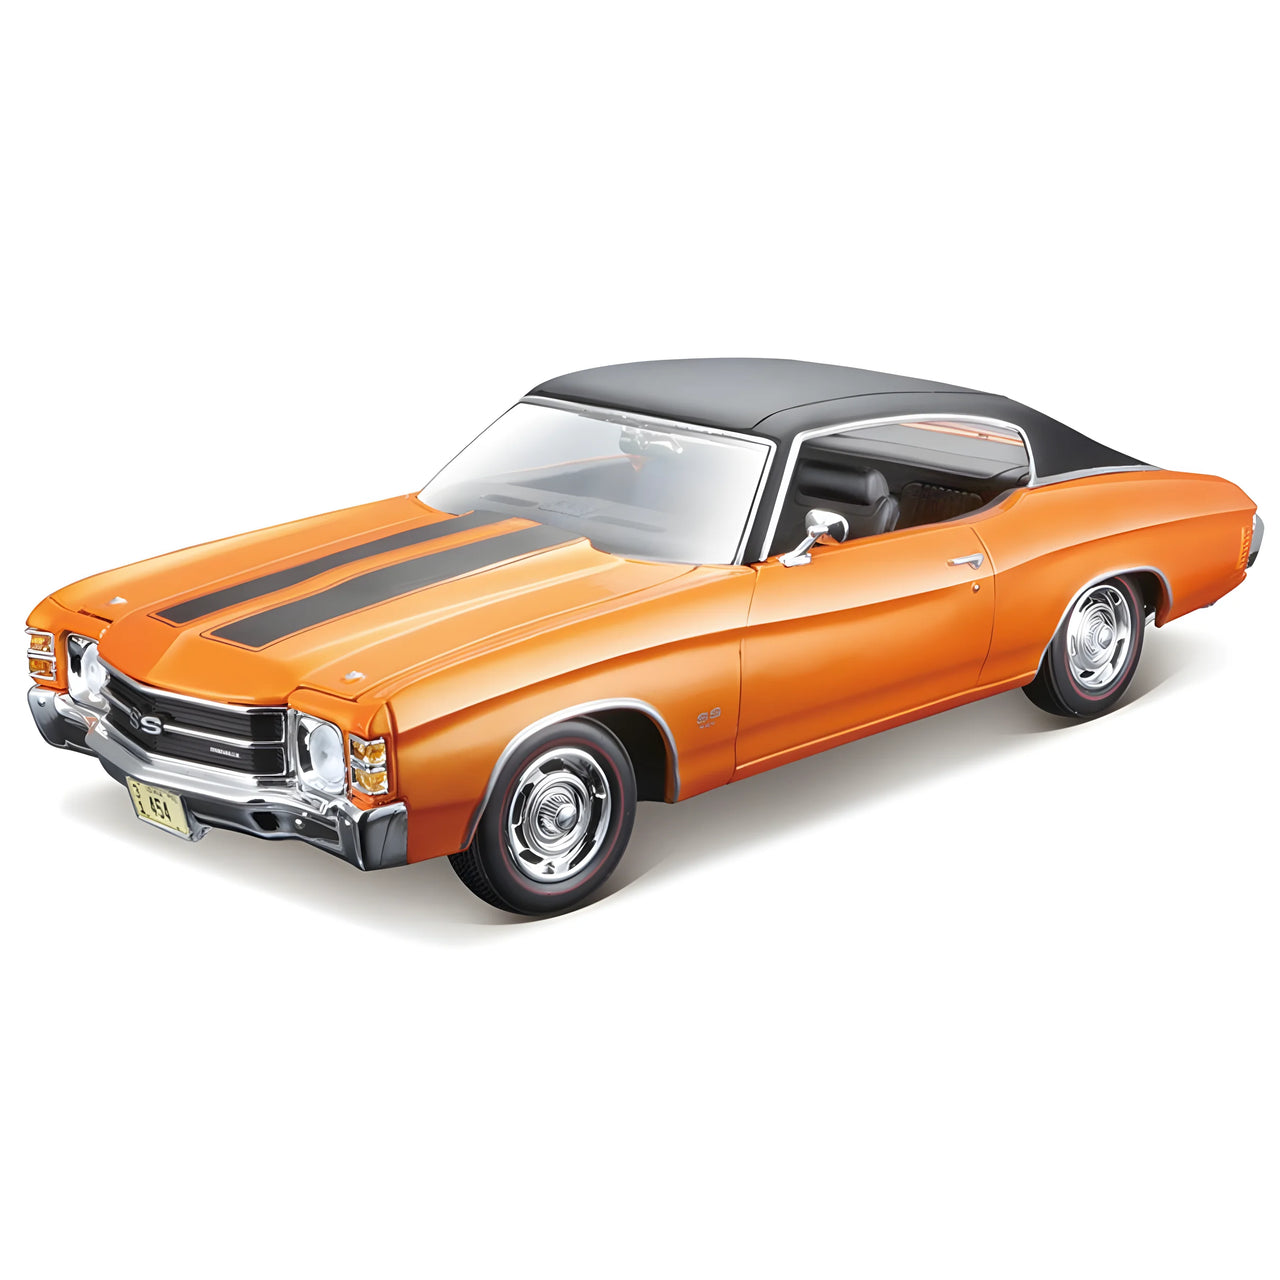 31890OR Chevrolet Chevelle SS 454 Year 1971 Scale 1:18